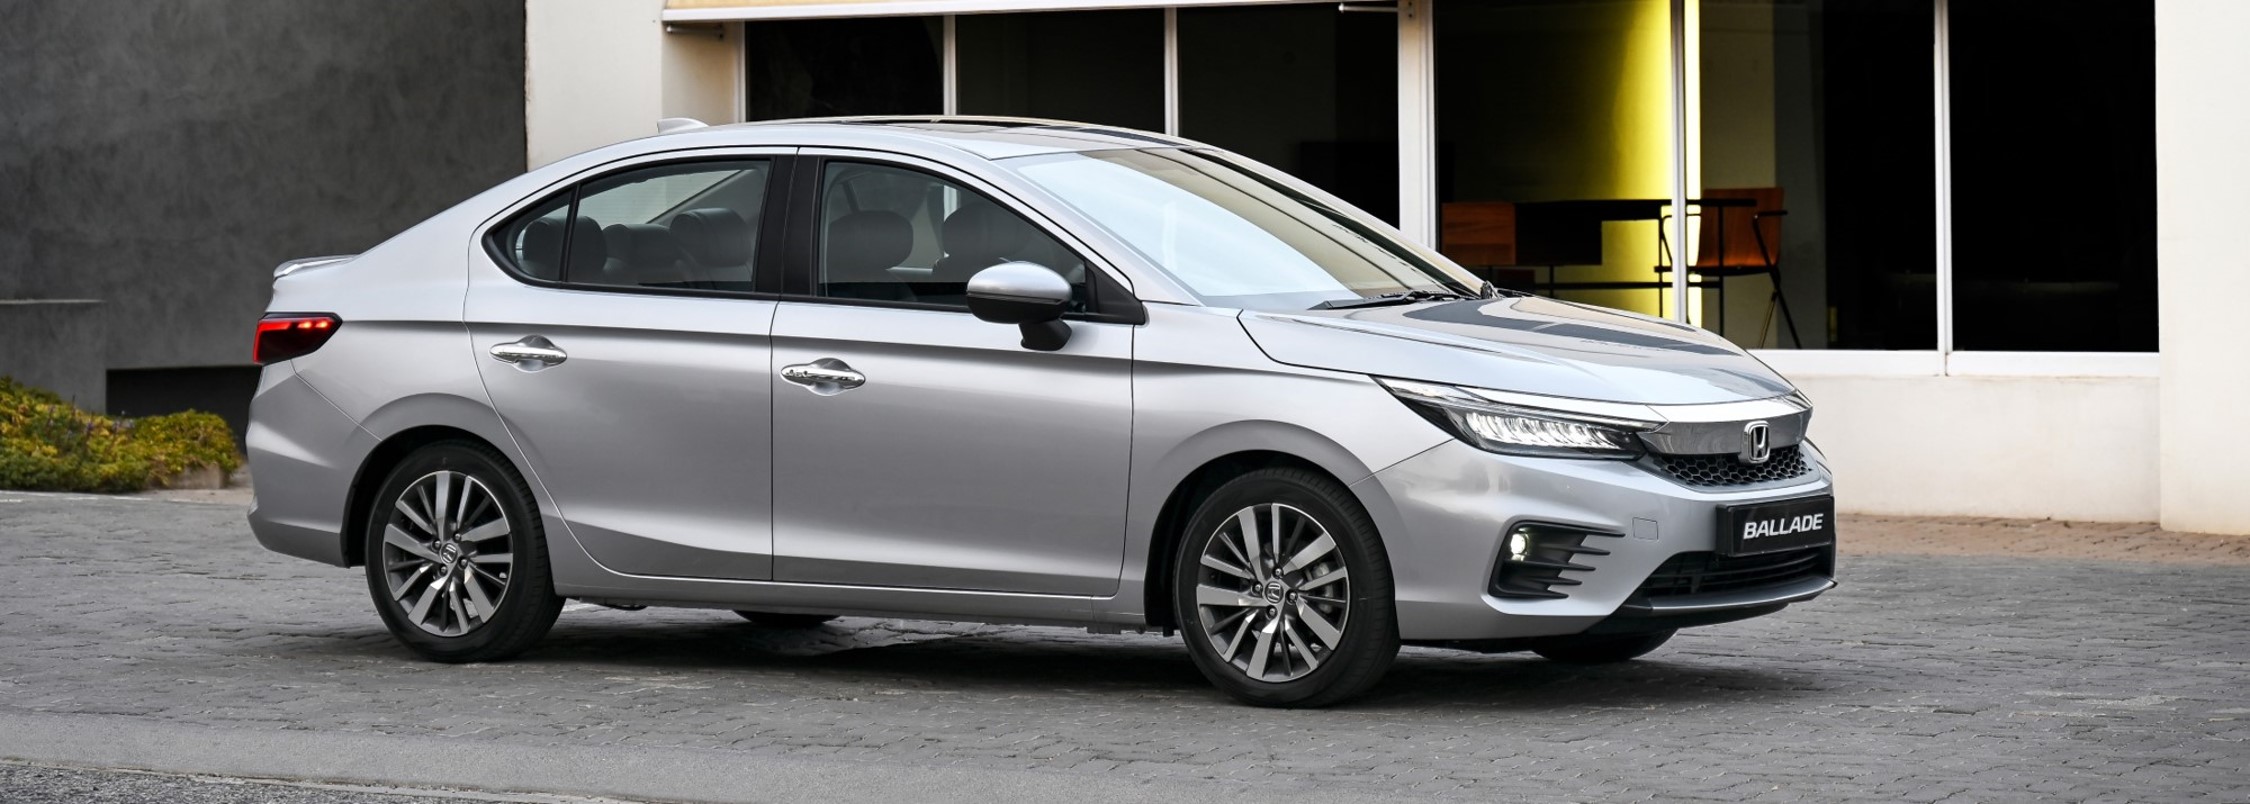 Brand-new Honda Ballade launched